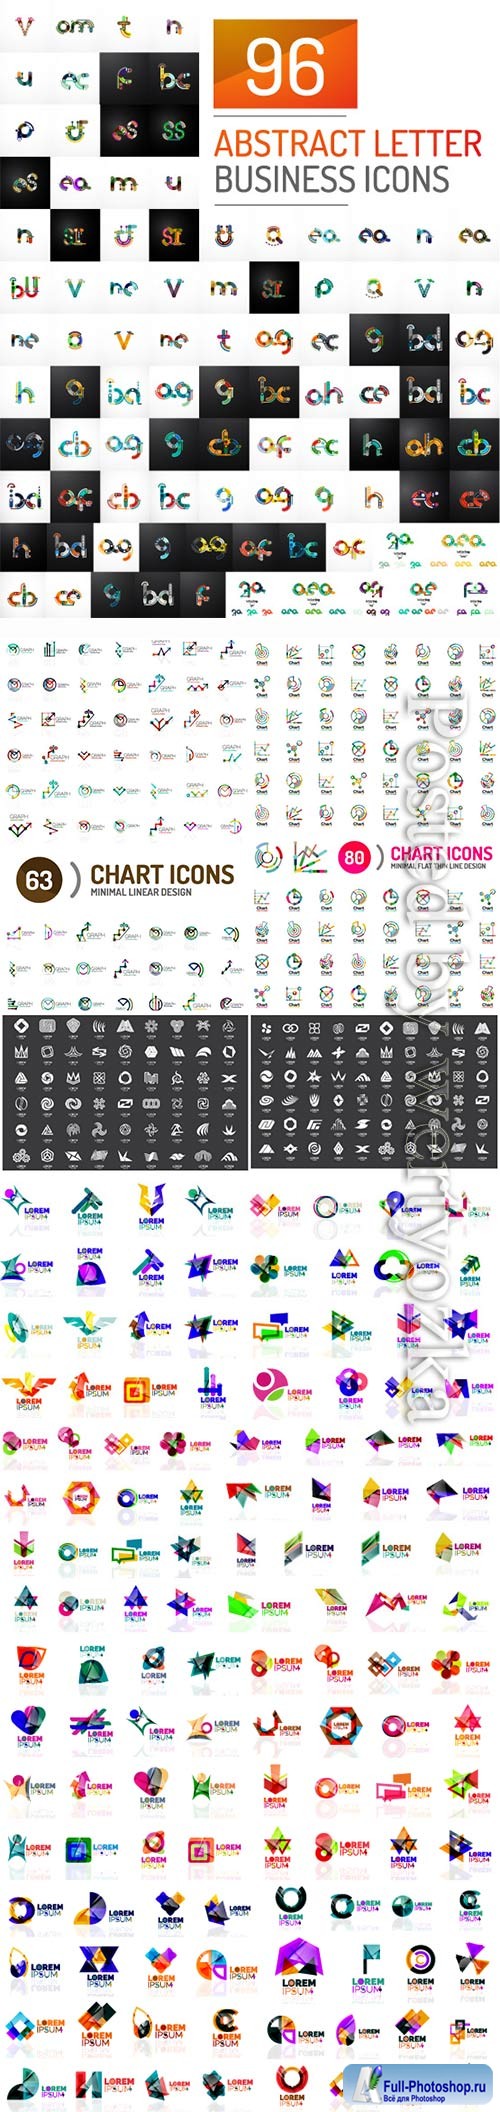 Set of vector logos, icons